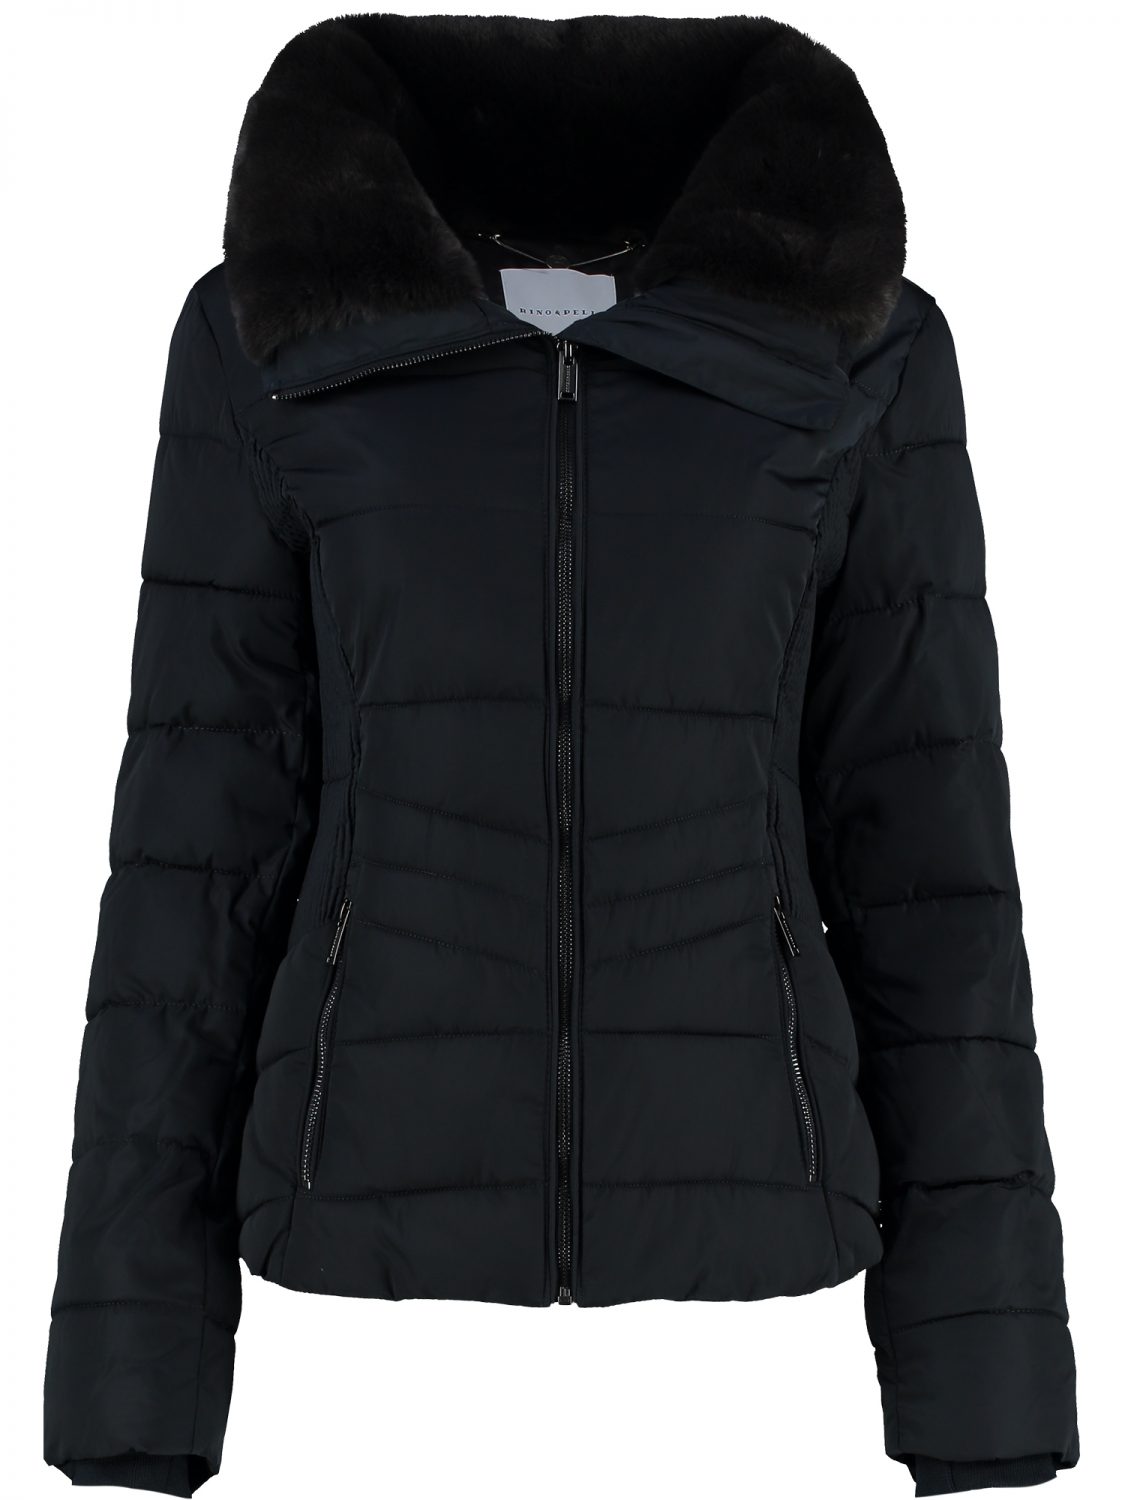 Women’s Navy Parka with Faux Fur Trim is a must have. It will keep you ...